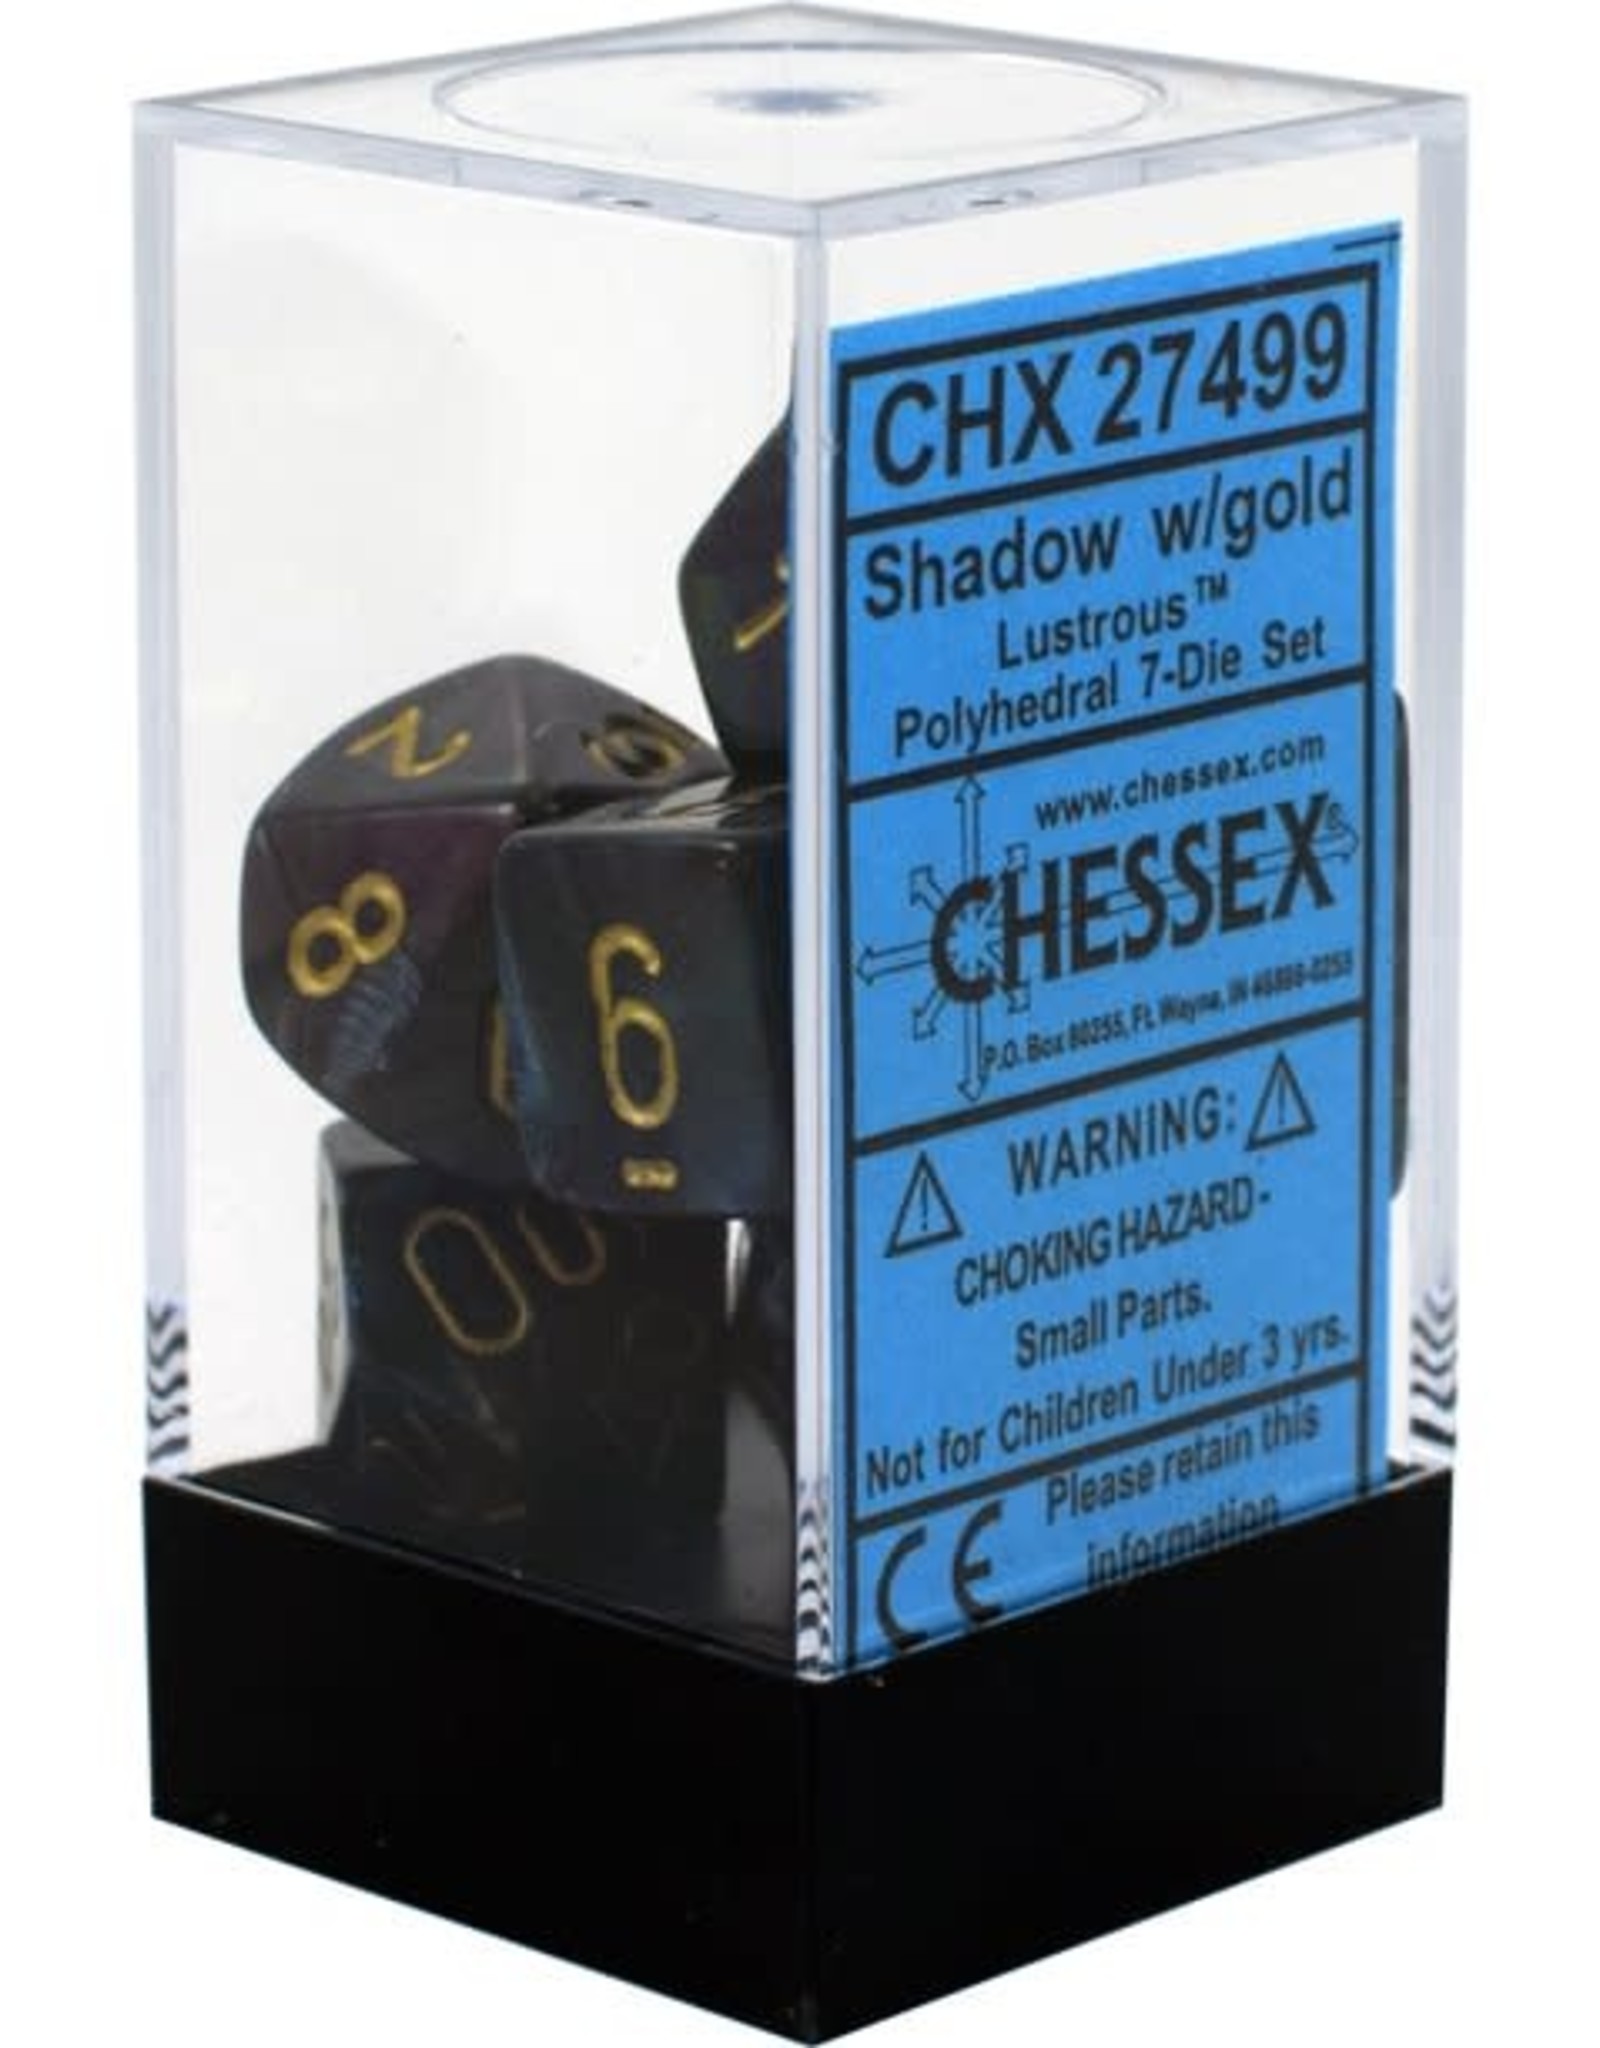 Chessex Lusterous Shadow/gold Polyhedral Set